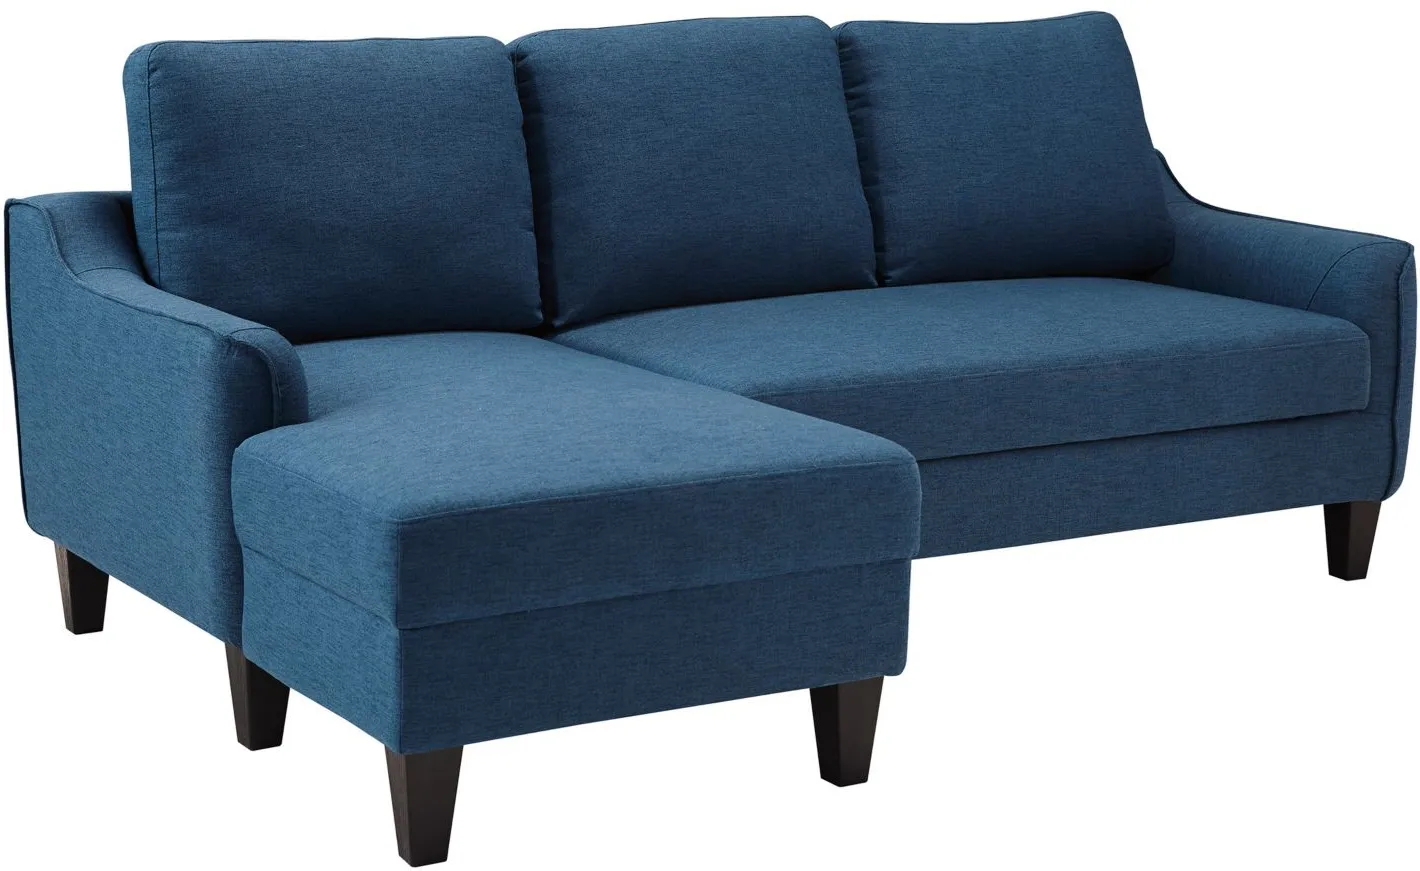 Morrisette 2-pc. Left Arm Facing Sectional Sleeper Sofa in Blue by Ashley Furniture